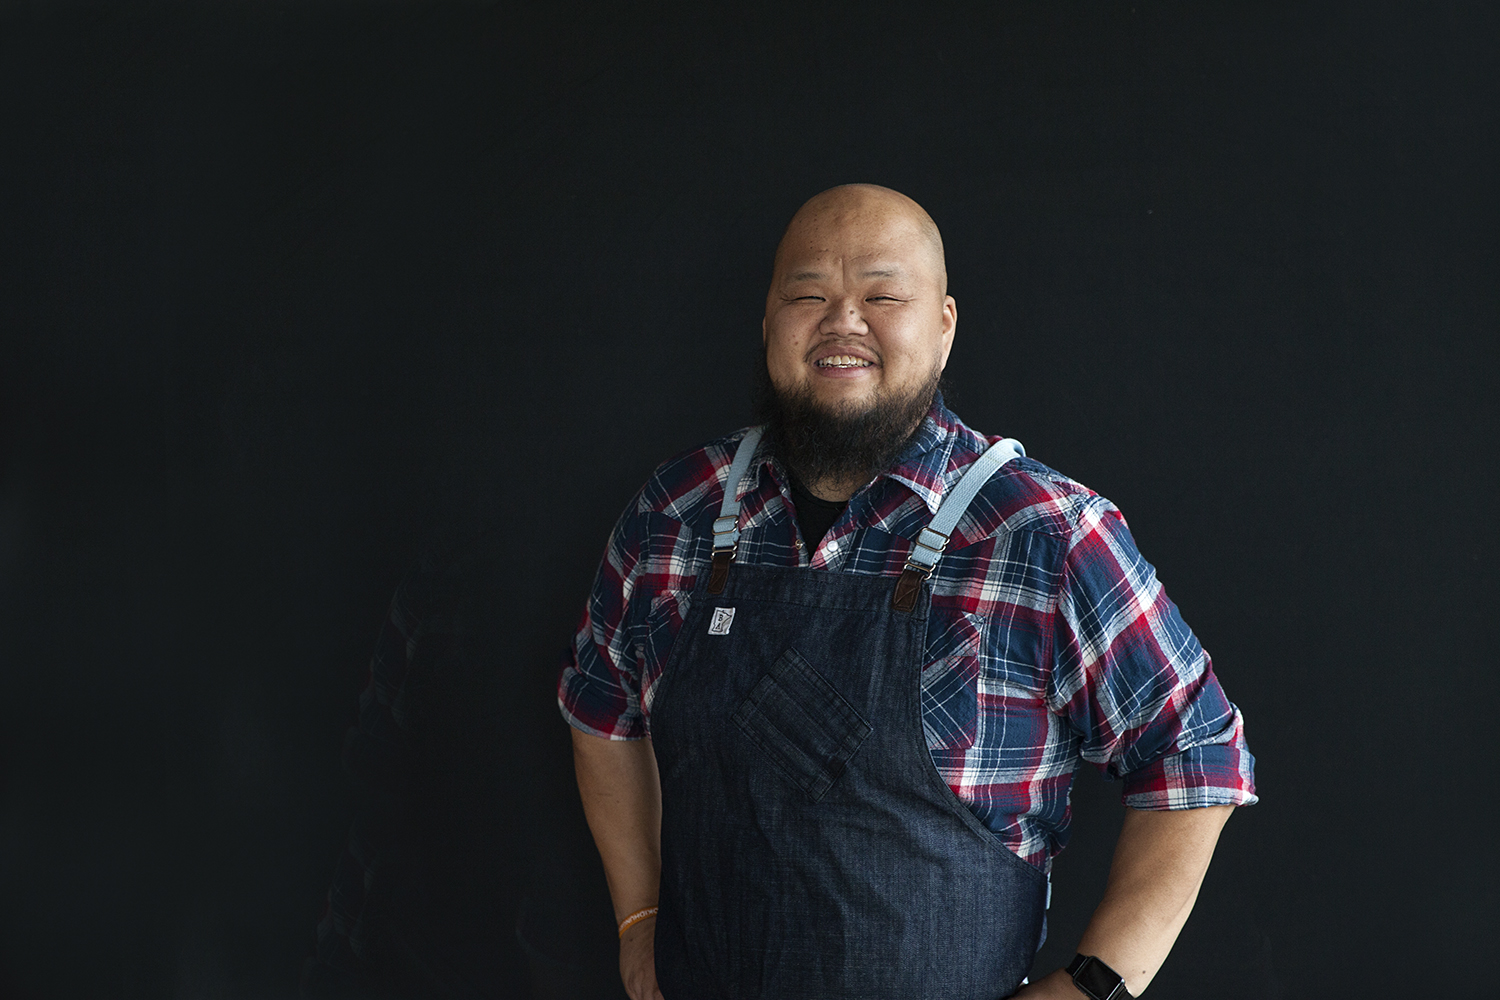 Chef Yia Vang is wearing a plaid shirt and denim apron, smiling, in front of a black background